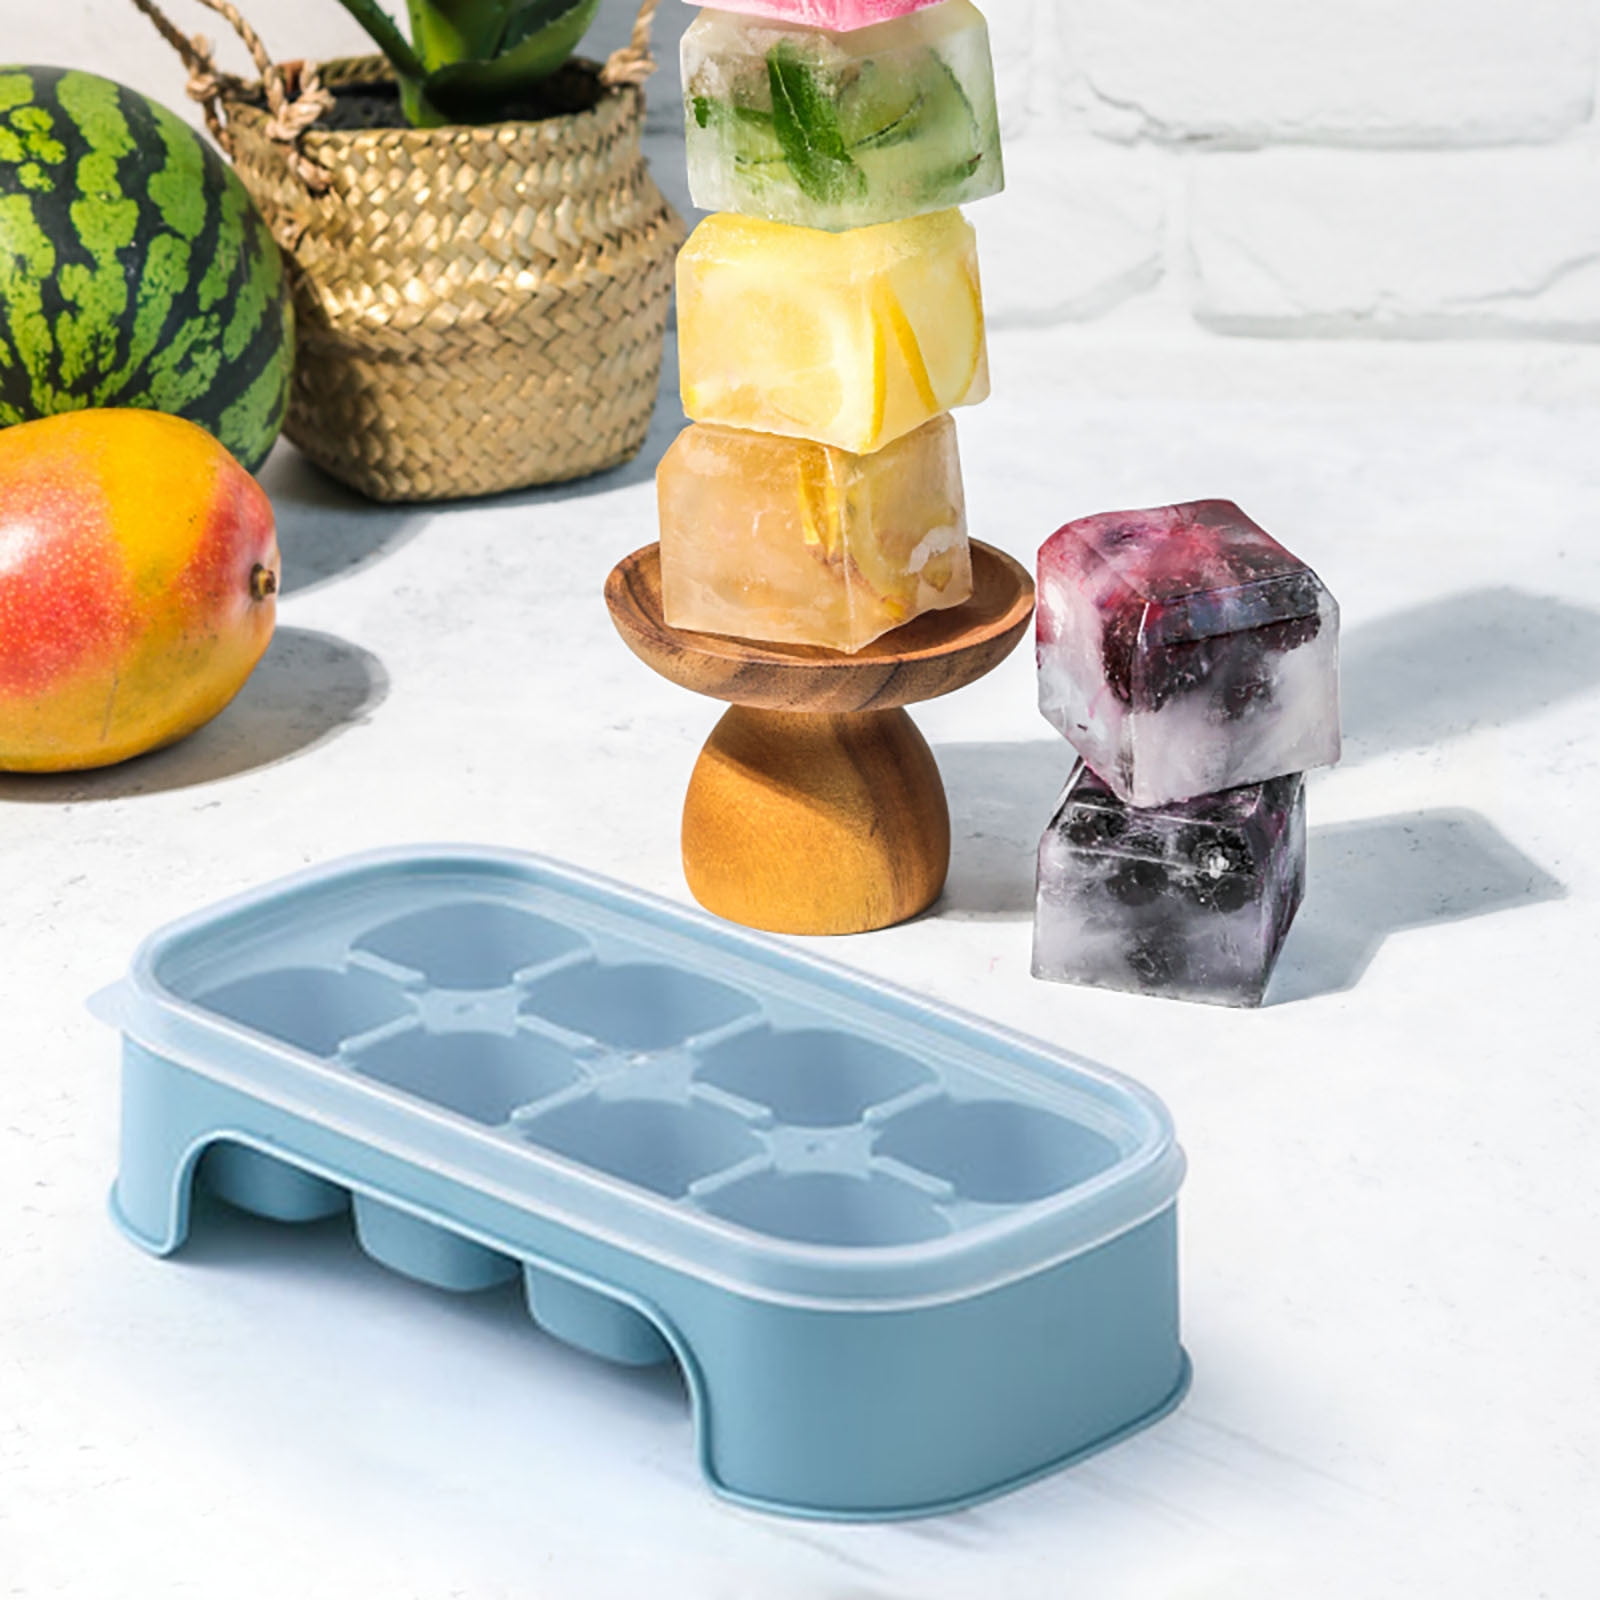 Xmmswdla The Sanitary Ice Tray for Freezer Make and Serve Ice Without Ever Touching The Ice - No Spills Silicone Ice Cube Tray with Lid - Ice Cube